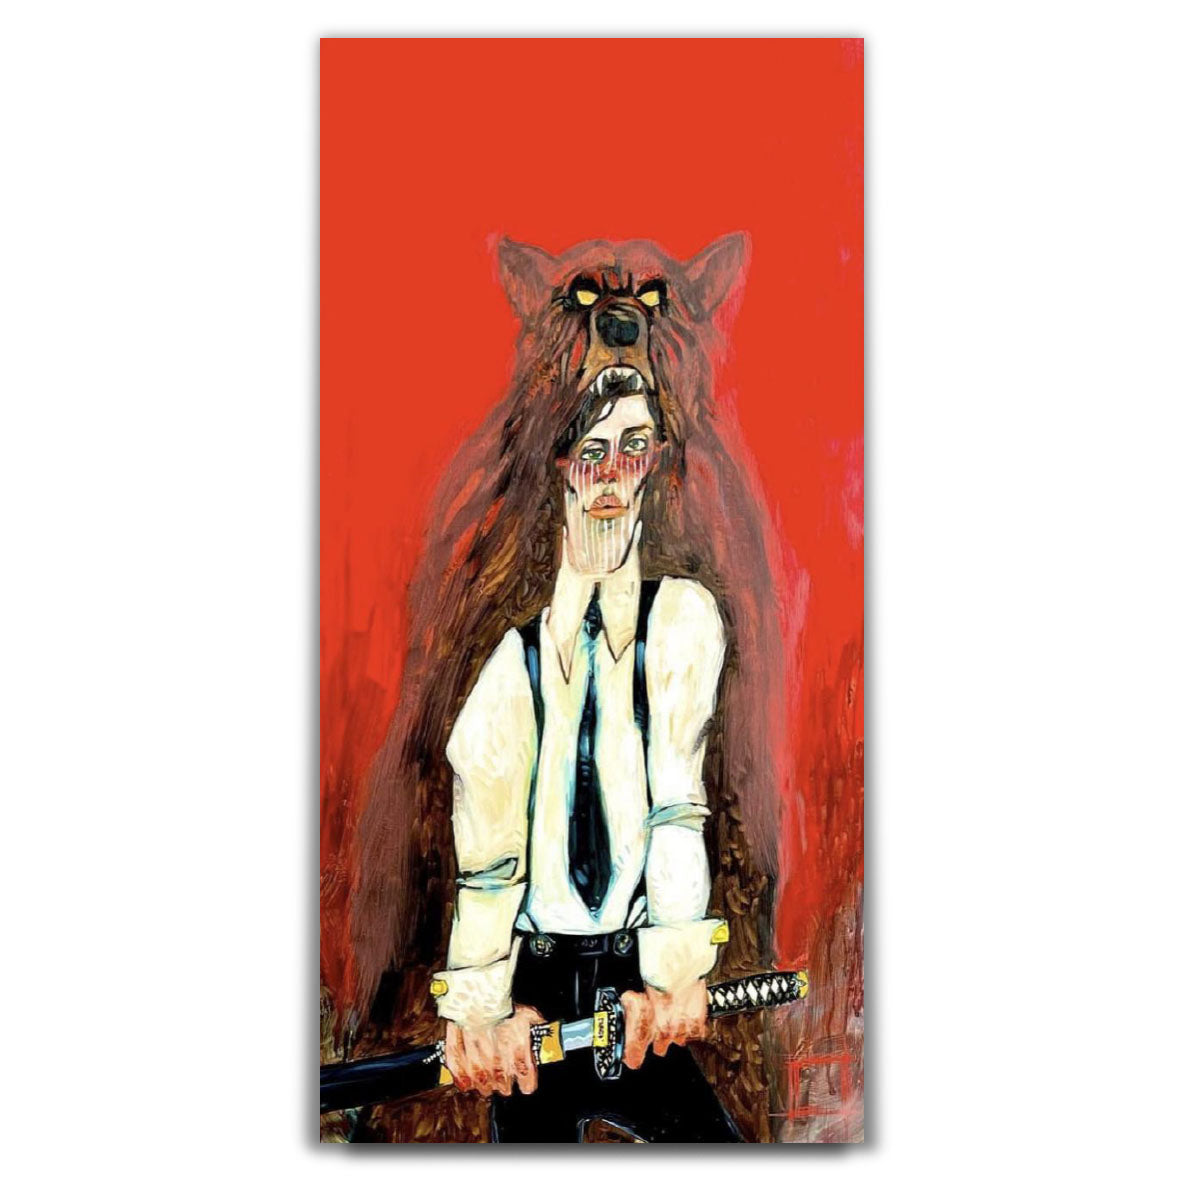 Todd White "Spirit State" Limited Edition Canvas Giclee